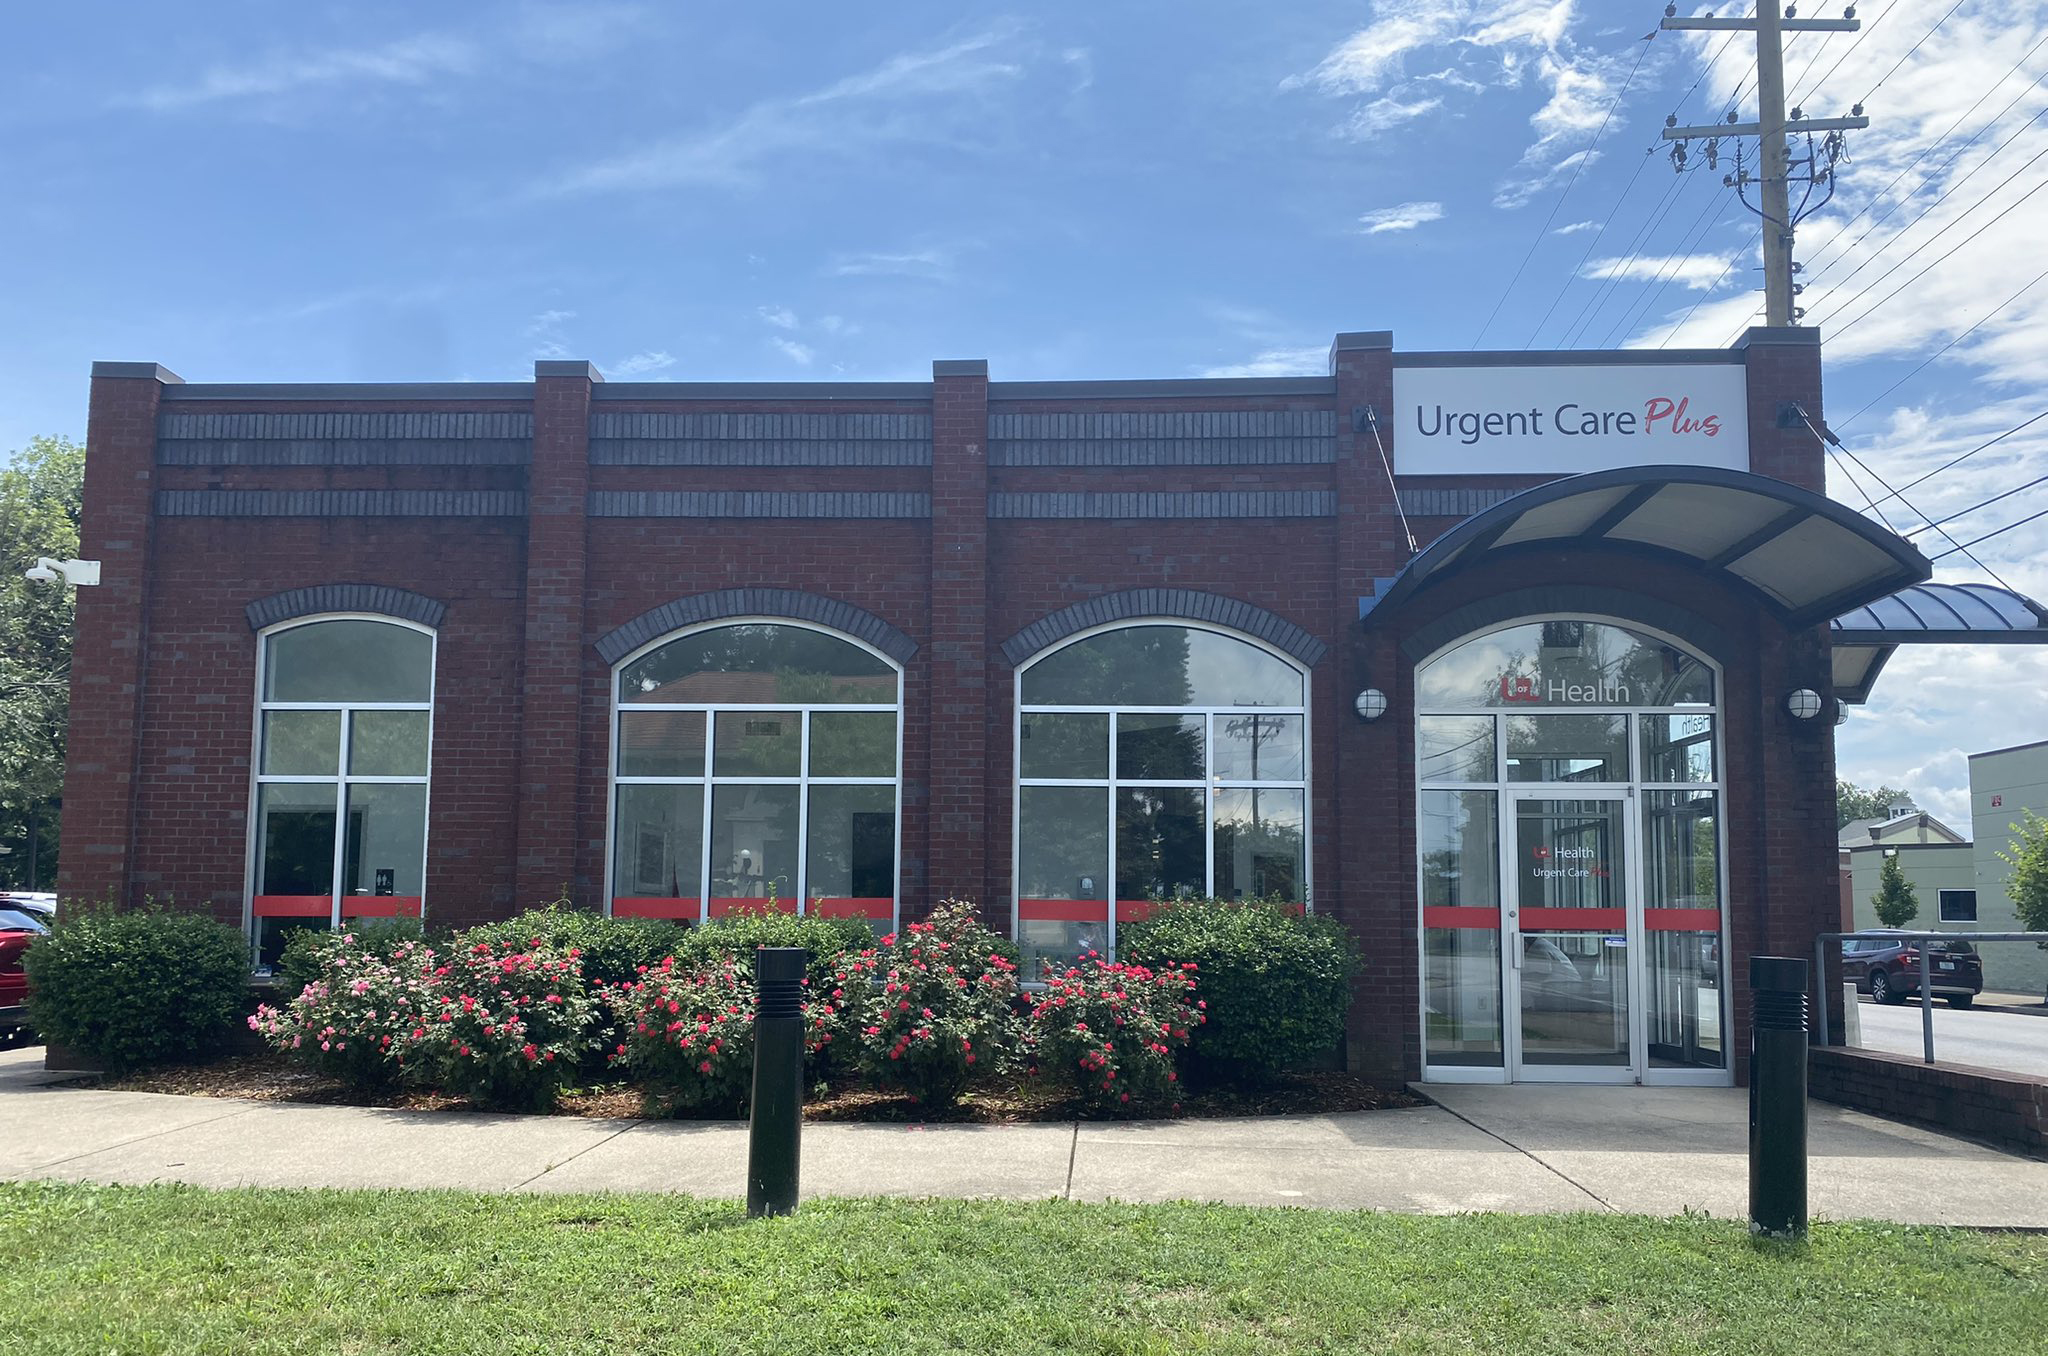 UofL Health opened an Urgent Care Plus location in west Louisville’s Parkland neighborhood.